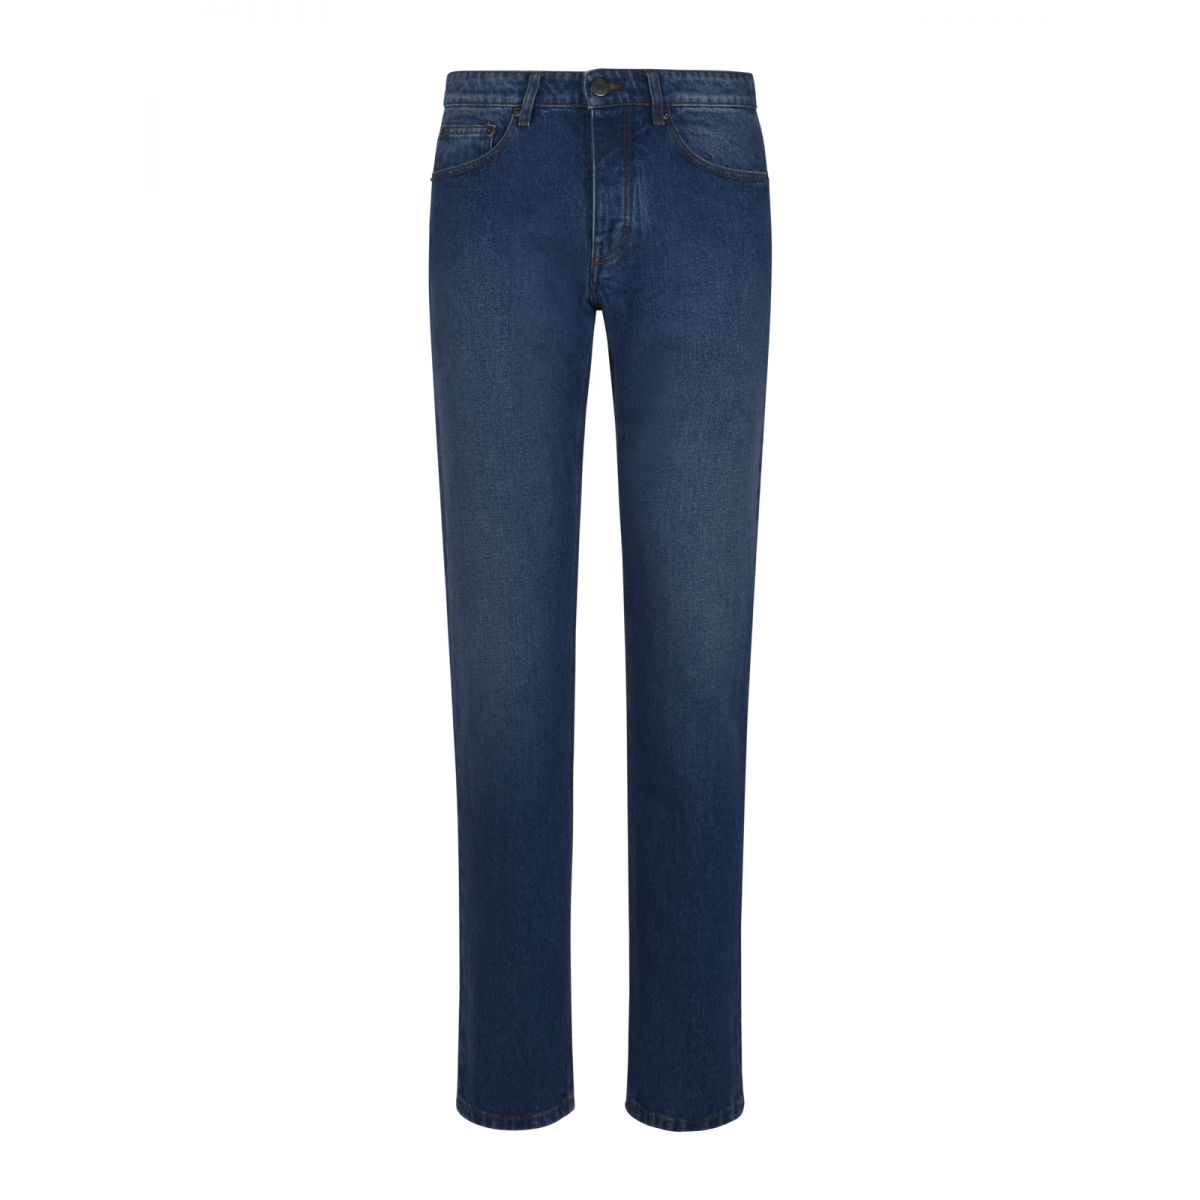 AMI - Mid-rise slim-fit jeans